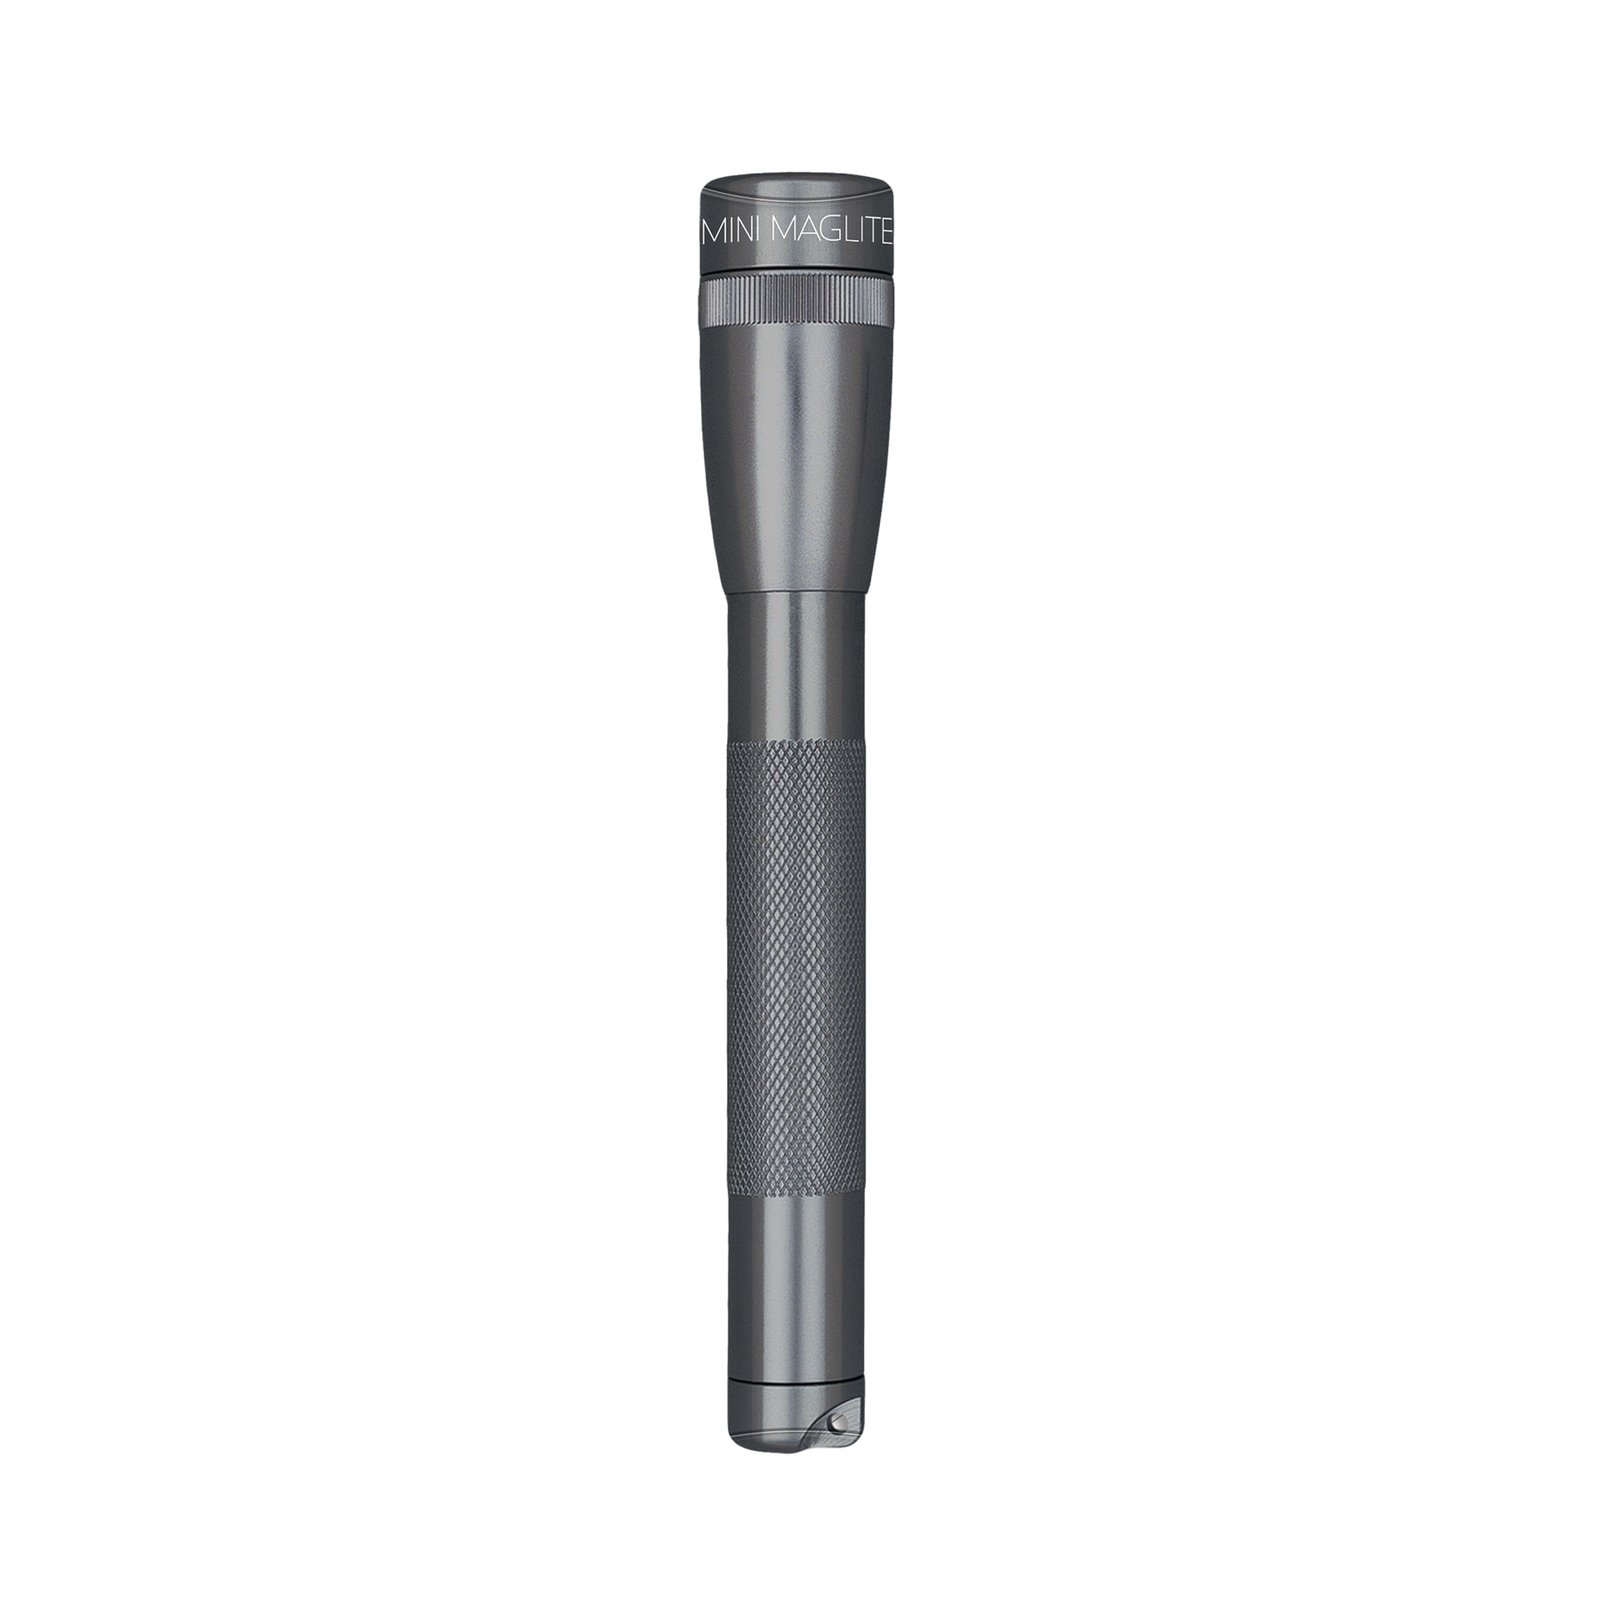 Maglite LED torch Mini, 2-Cell AA, holster, grey